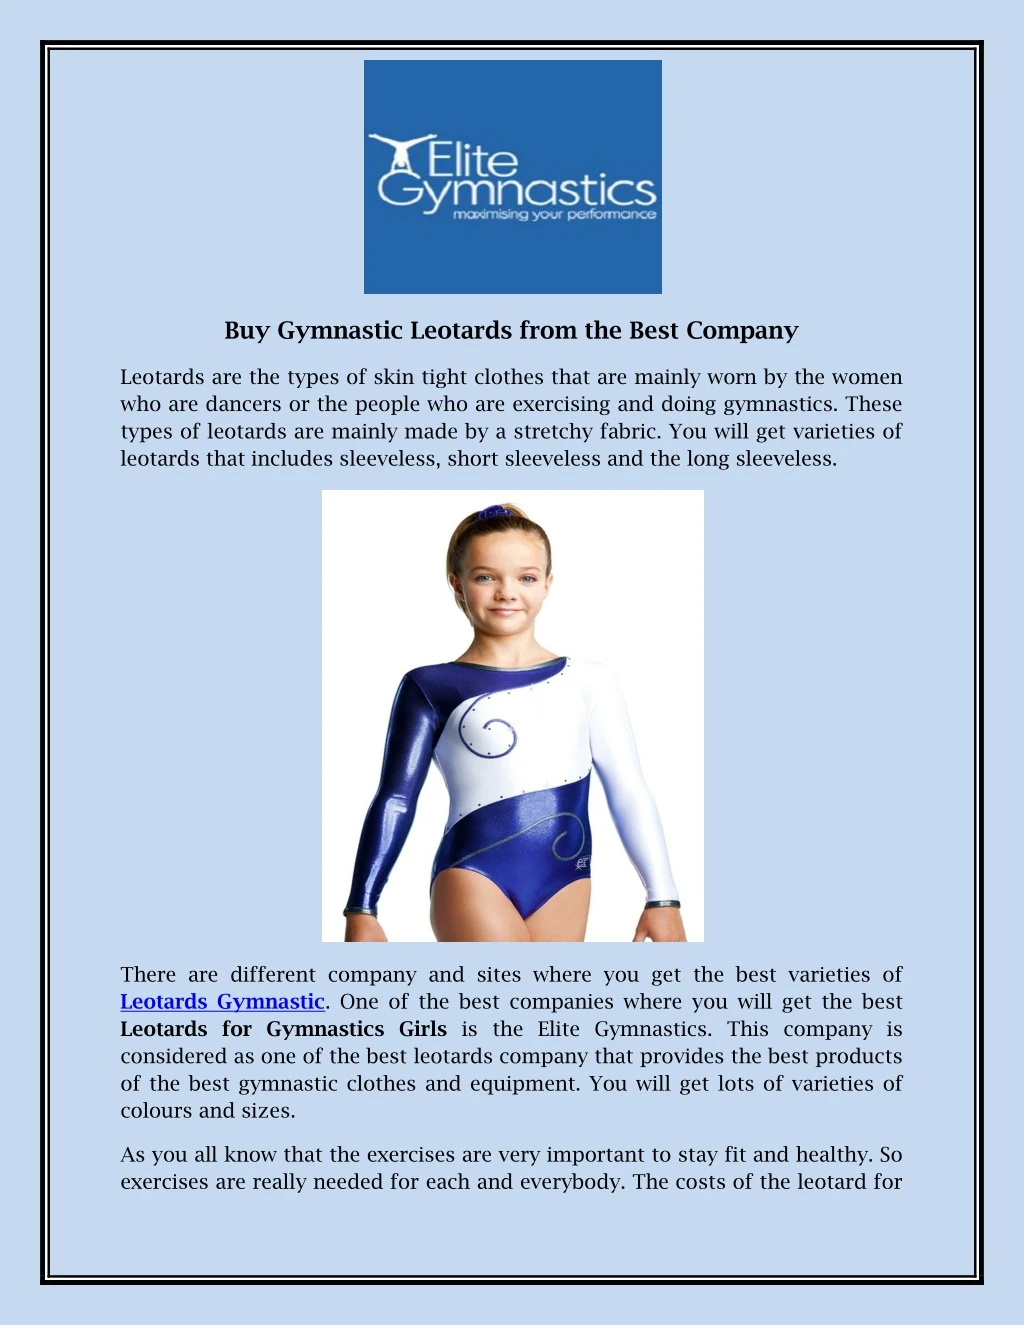 buy gymnastic leotards from the best company